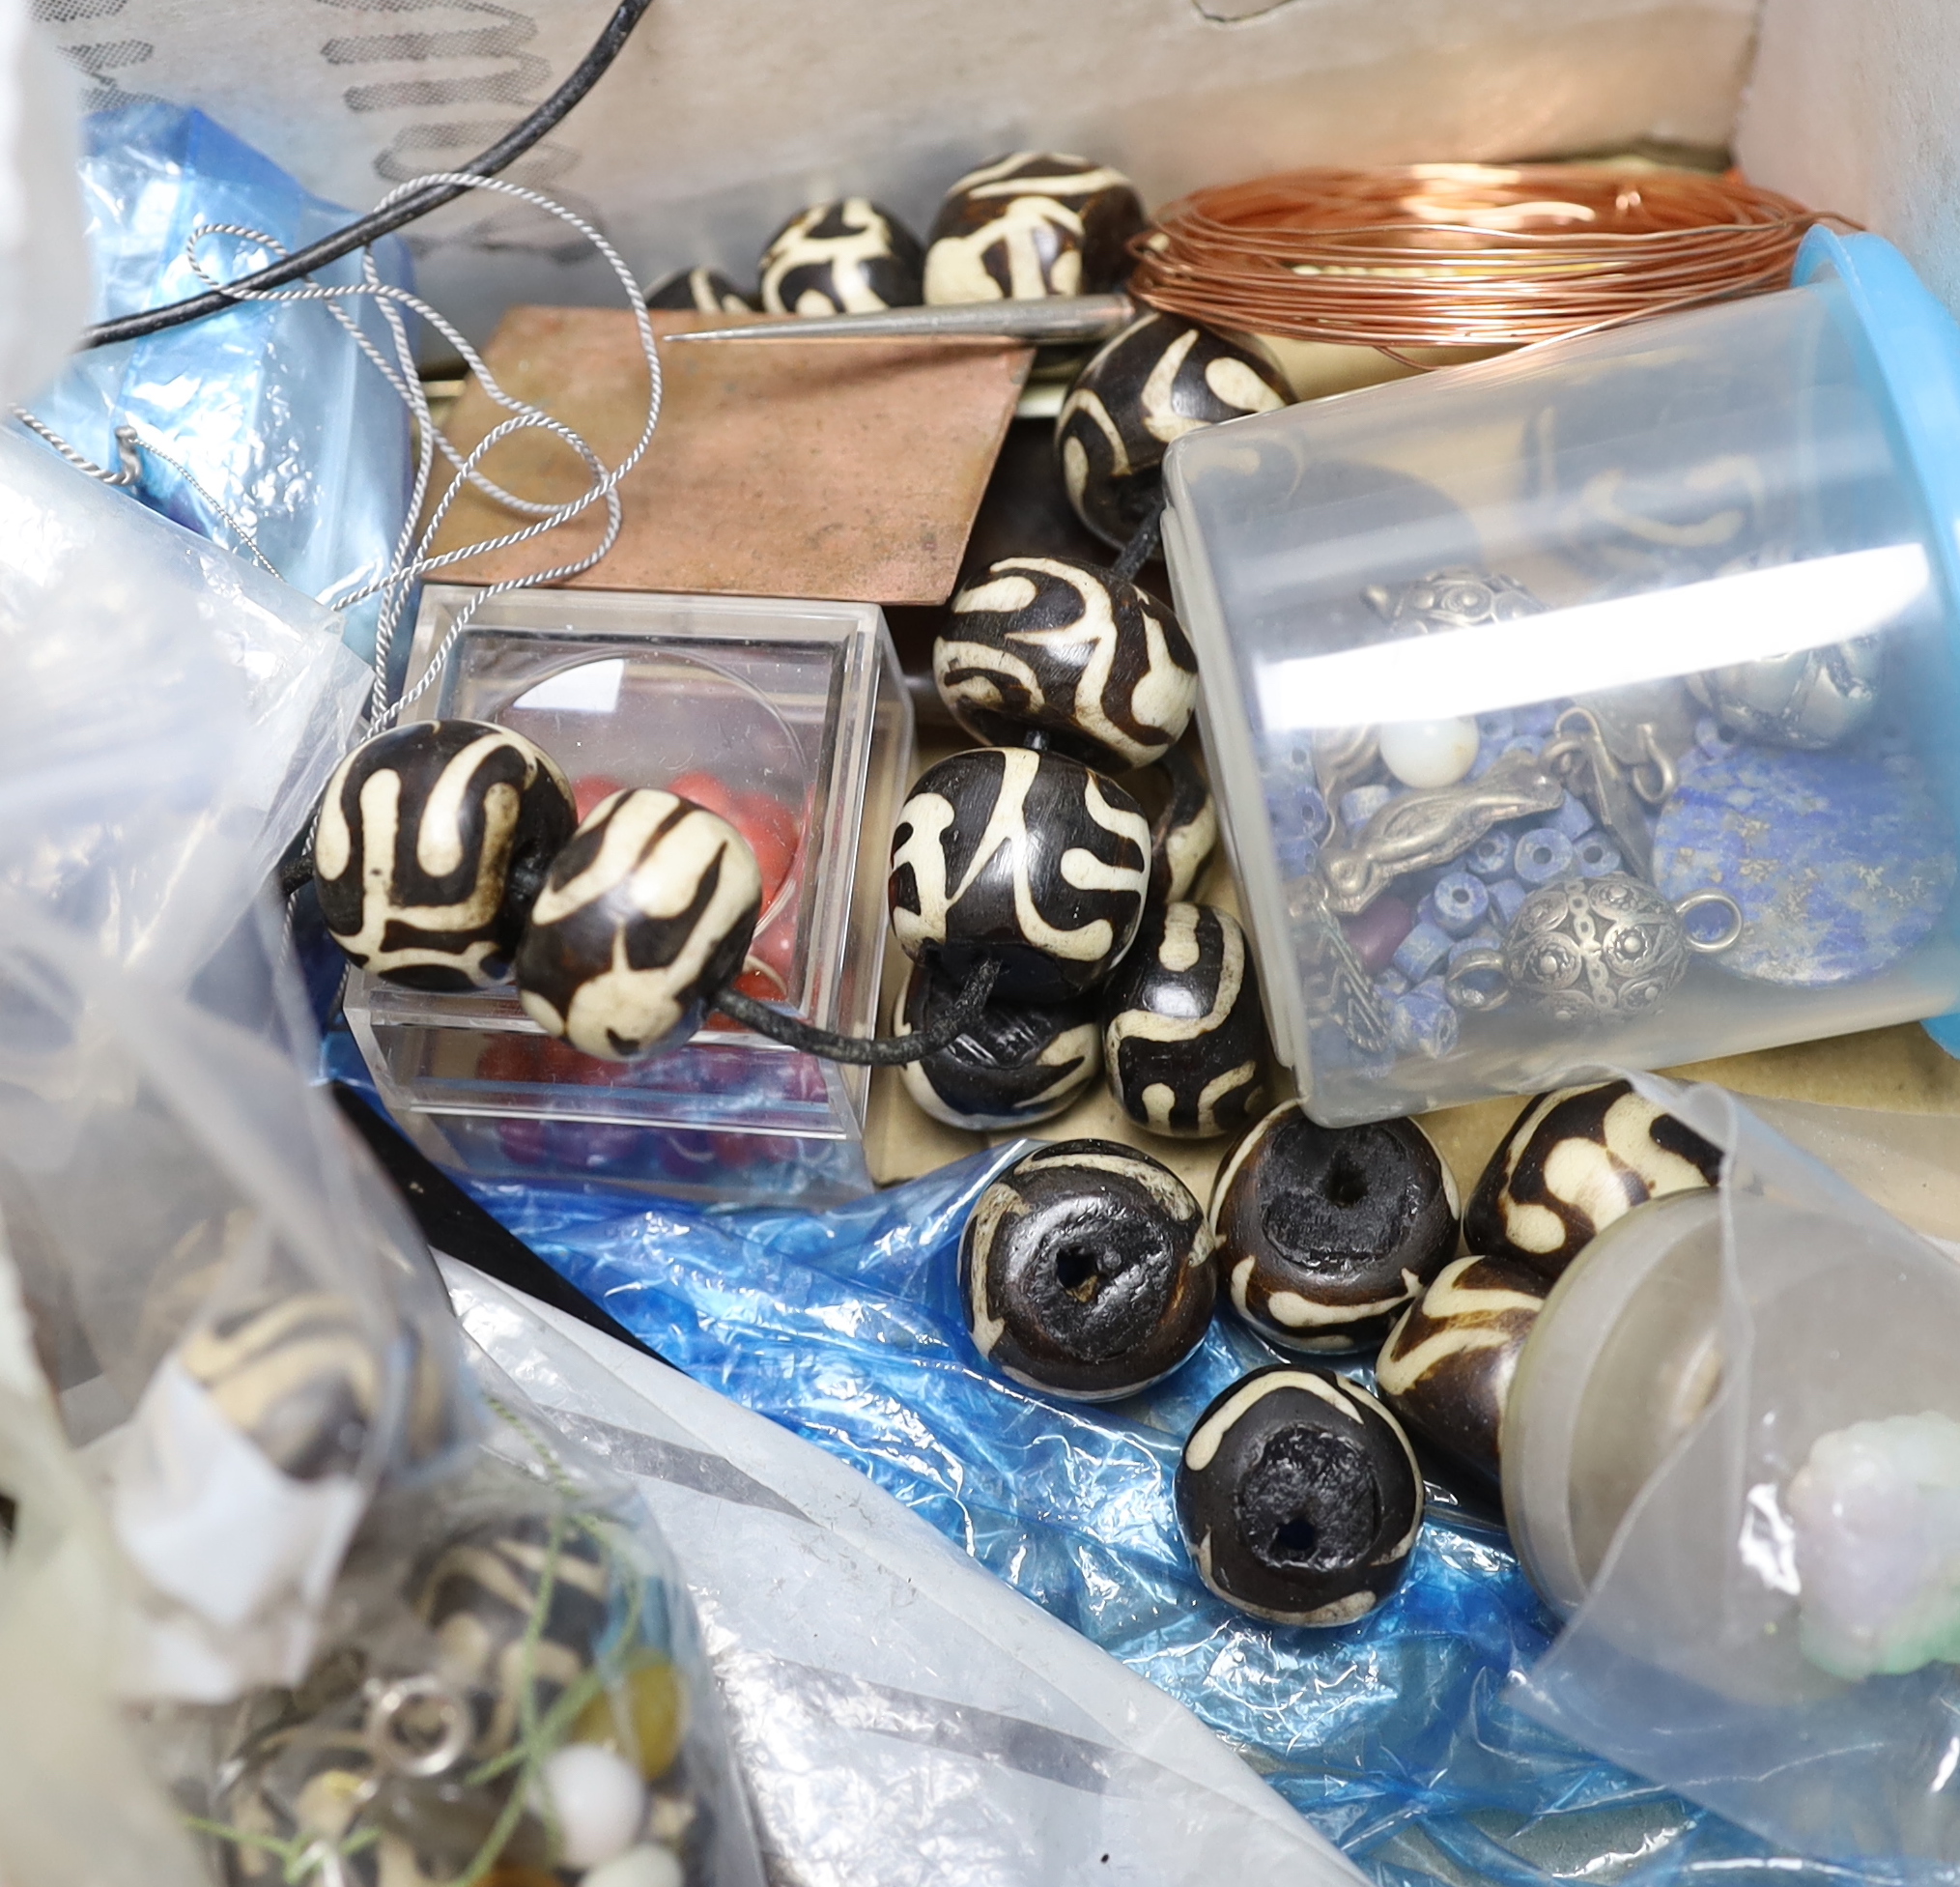 A quantity of assorted jewellery related items including loose beads, bolt rings, thread, copper wire, agate stones, etc.